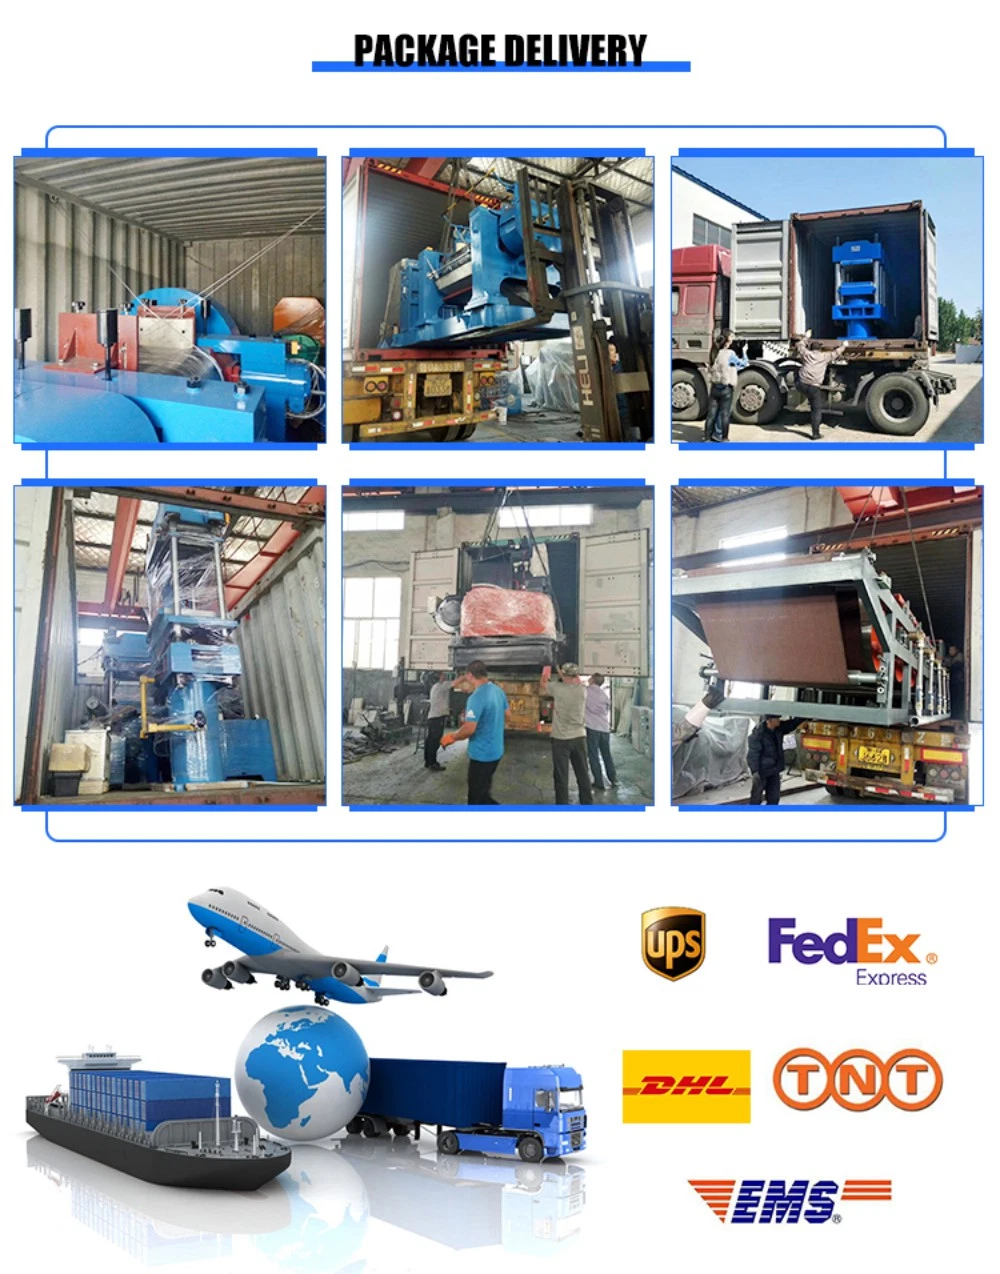 Rubber Vulcanizing Press, Rubber Injection Press Machine, Rubber Molding Machine, Rubber Press Machine